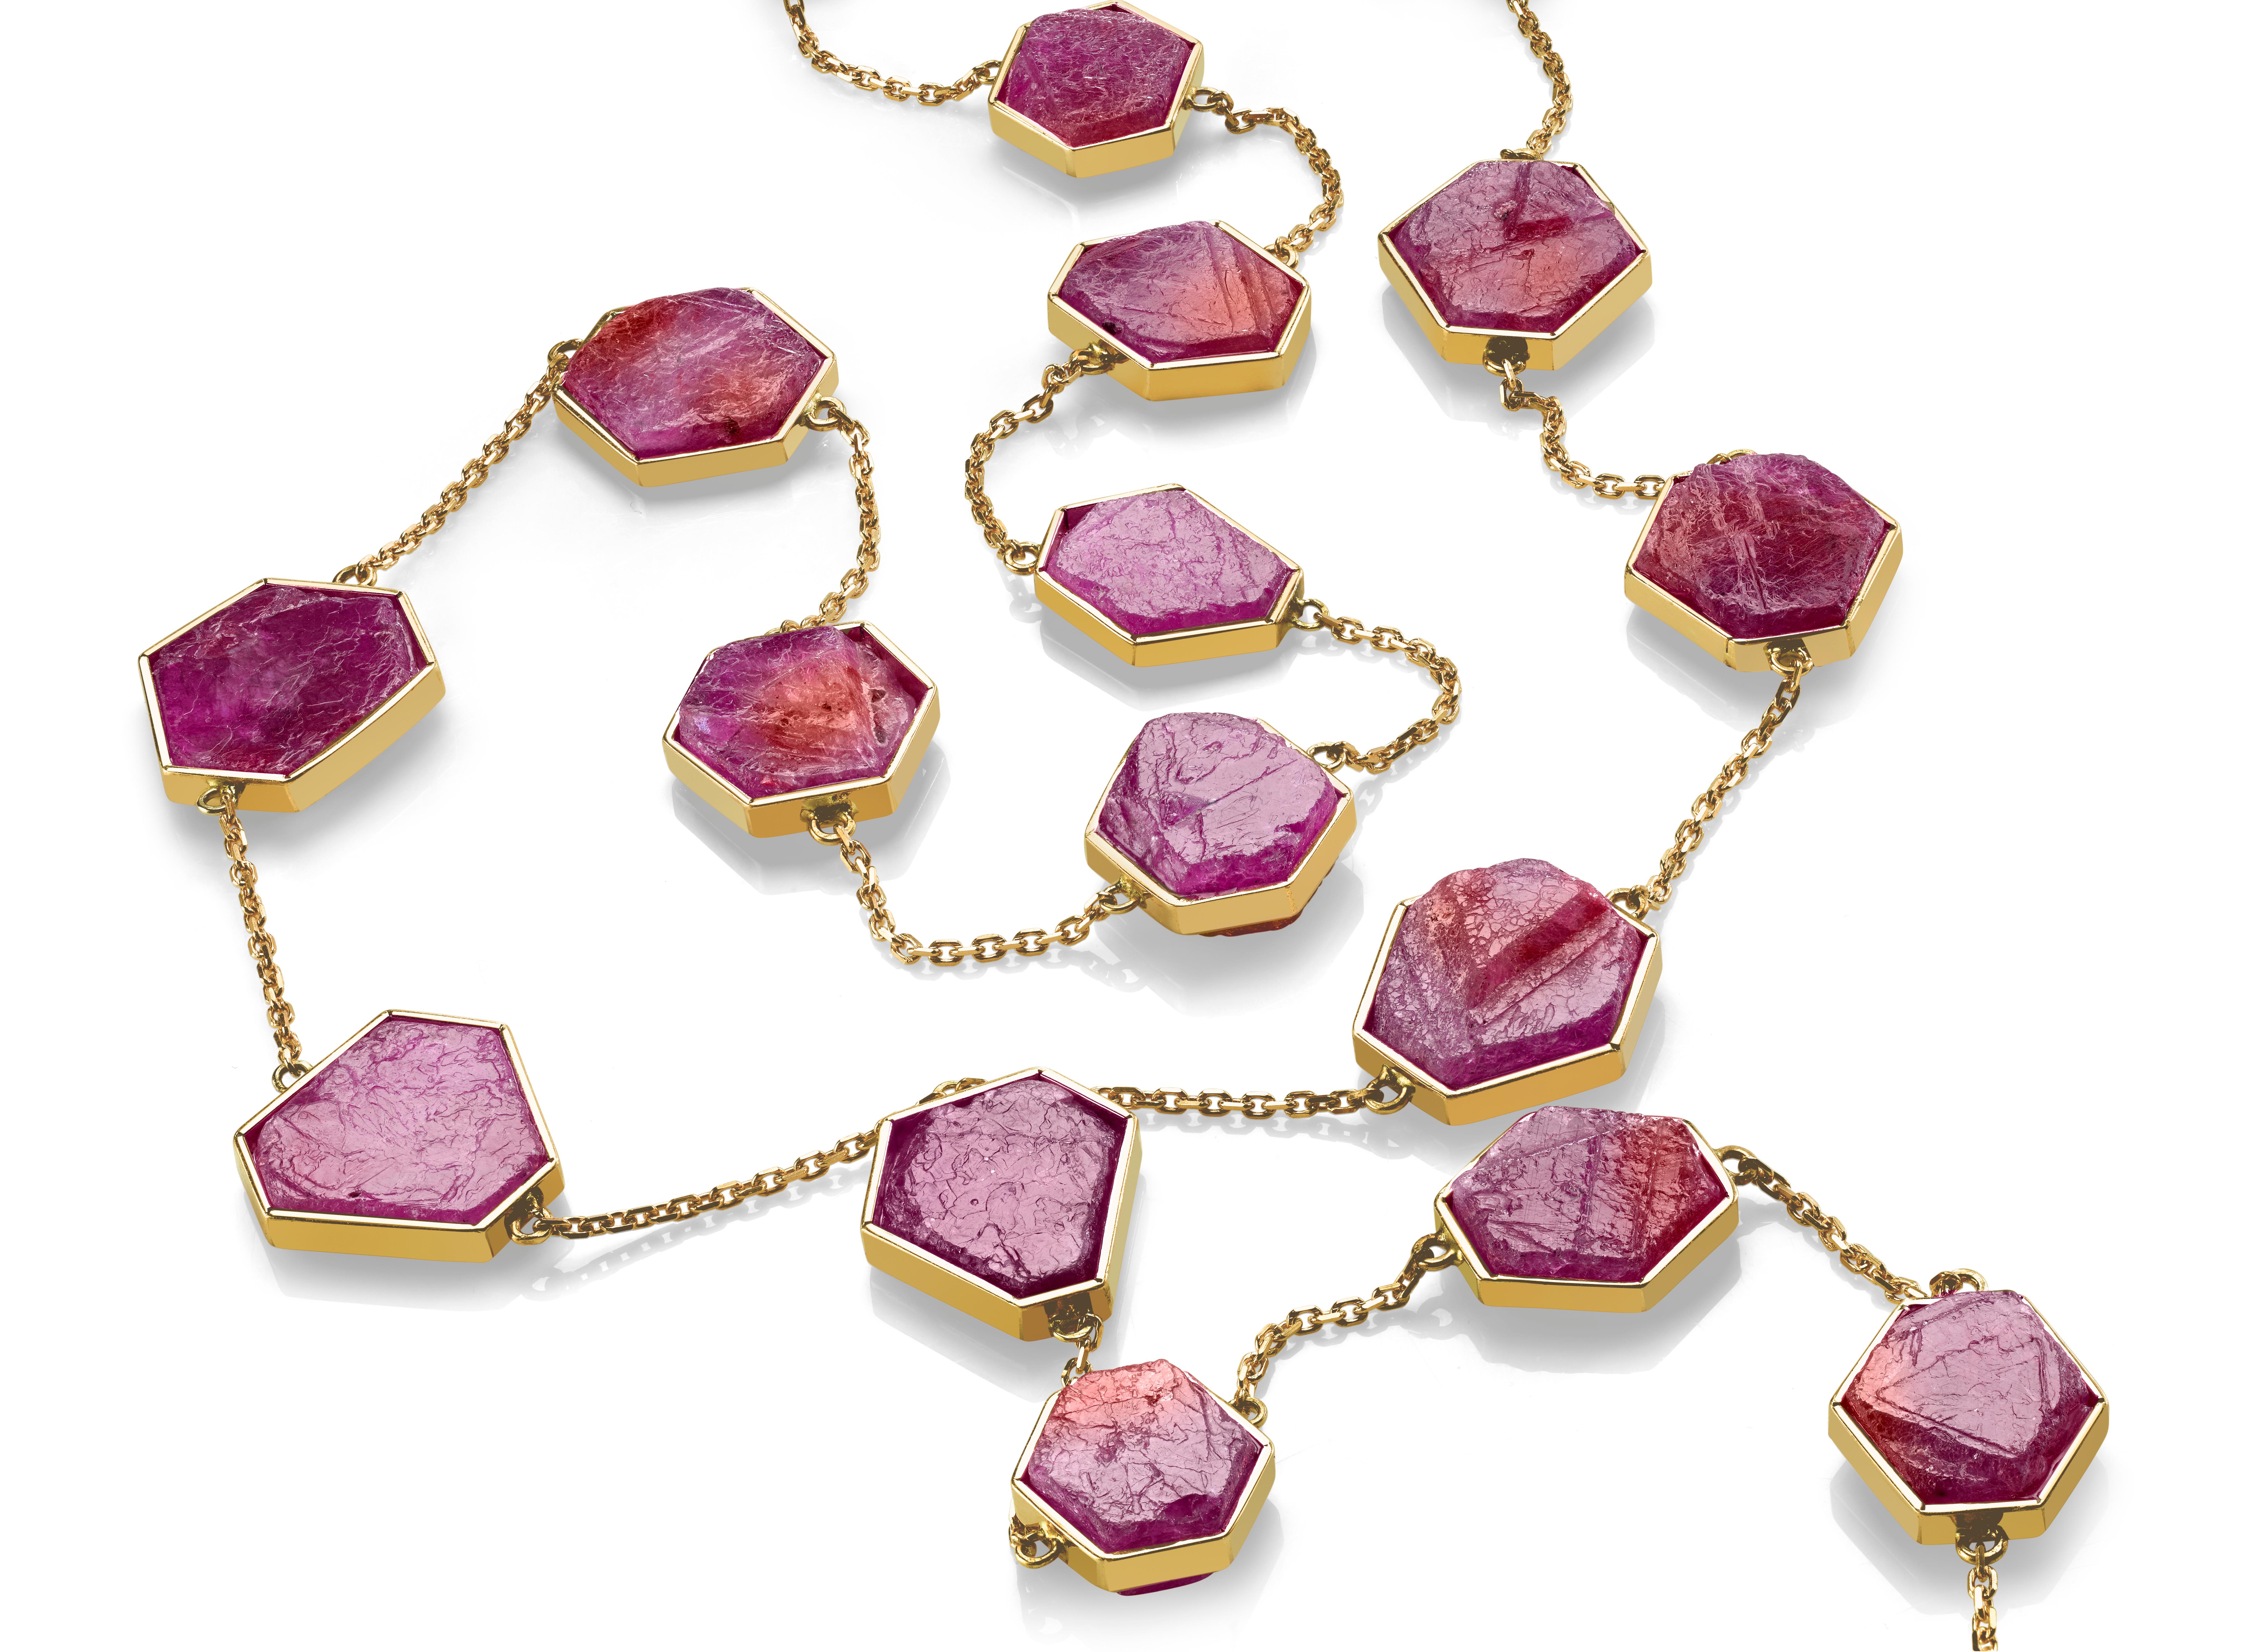 An ode to natural raw gemstones. Untouched and uncut rubies in their glorious organic perfection featured in this One-of-A-Kind Ruby Lariat.
Raw Red Ruby necklace features 23 custom geometric hexagon cut natural ruby chunks framed by 18k Rose Gold